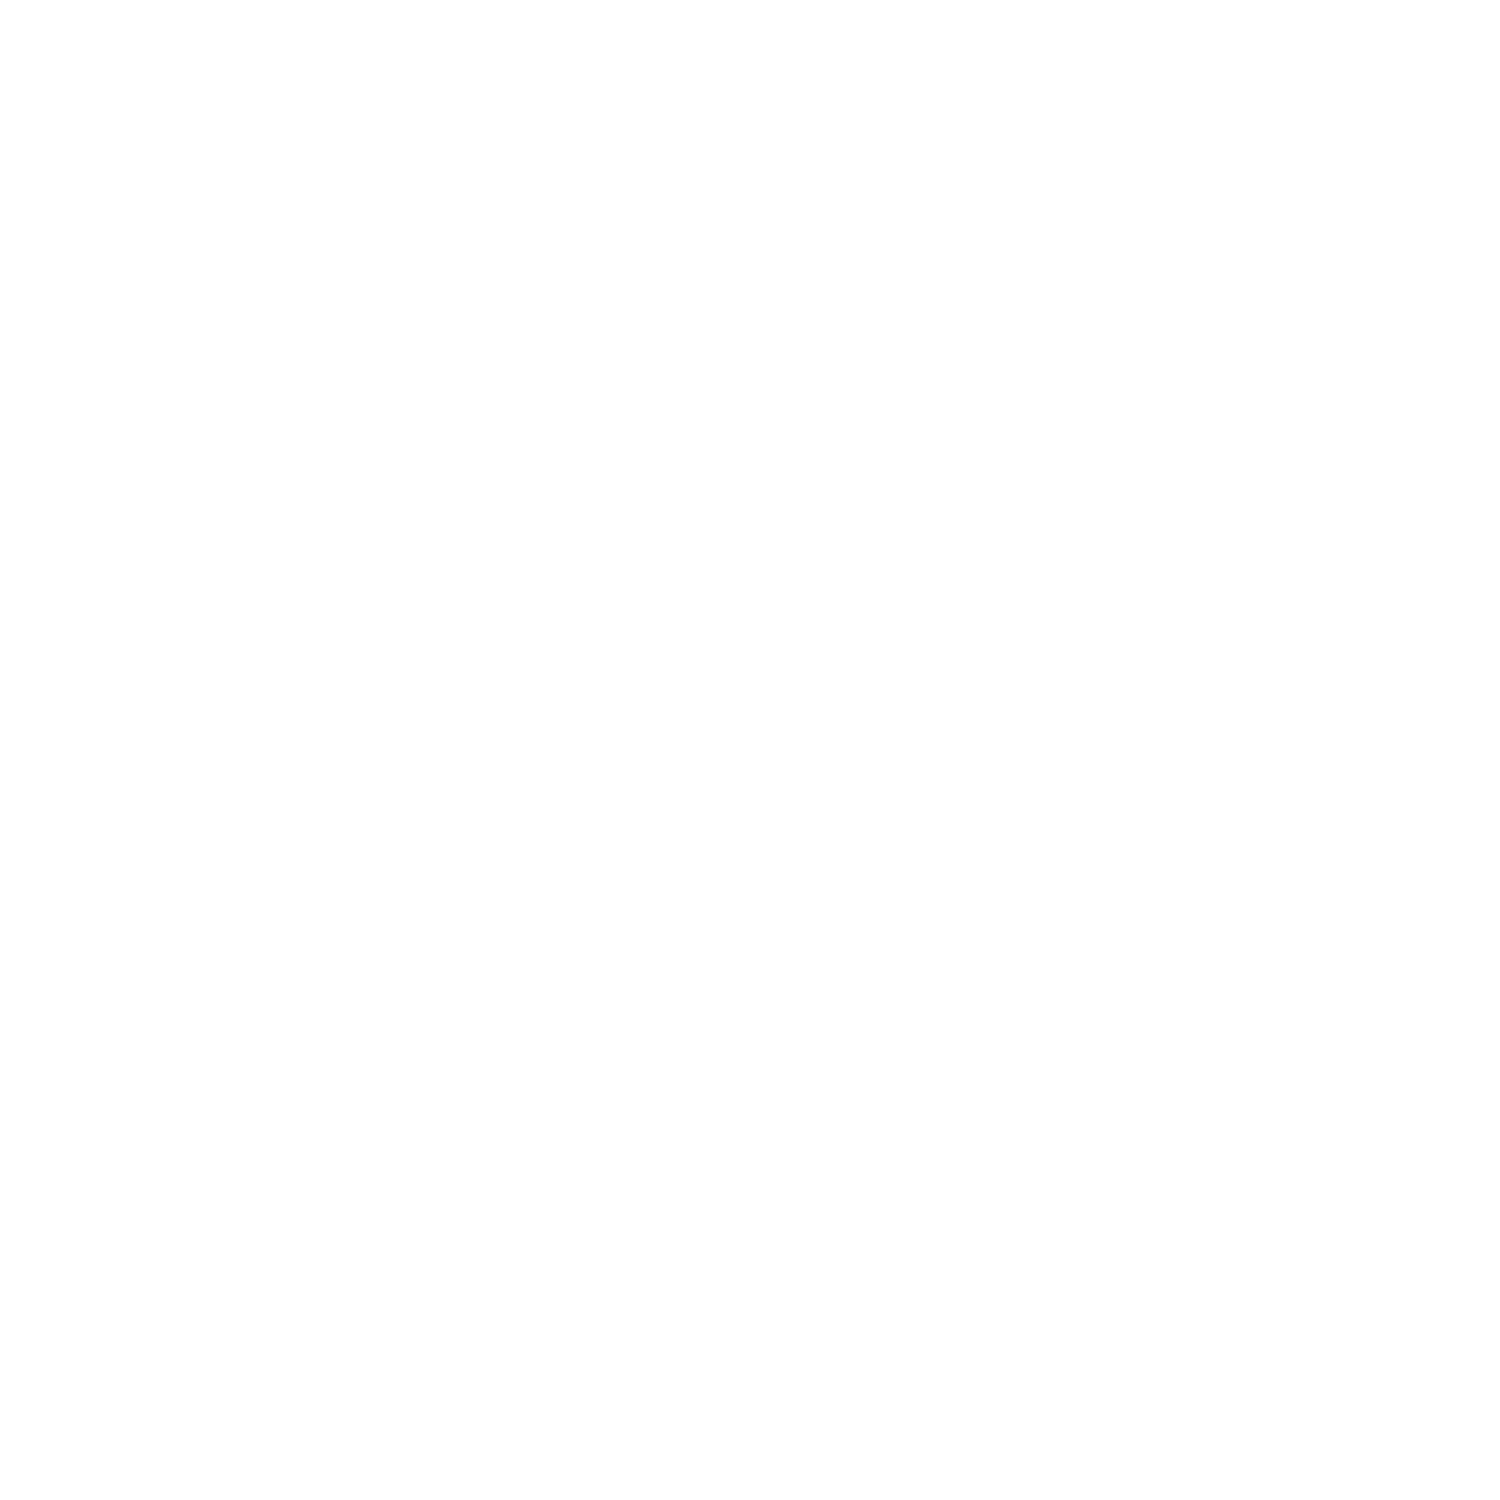 The Pressing Room